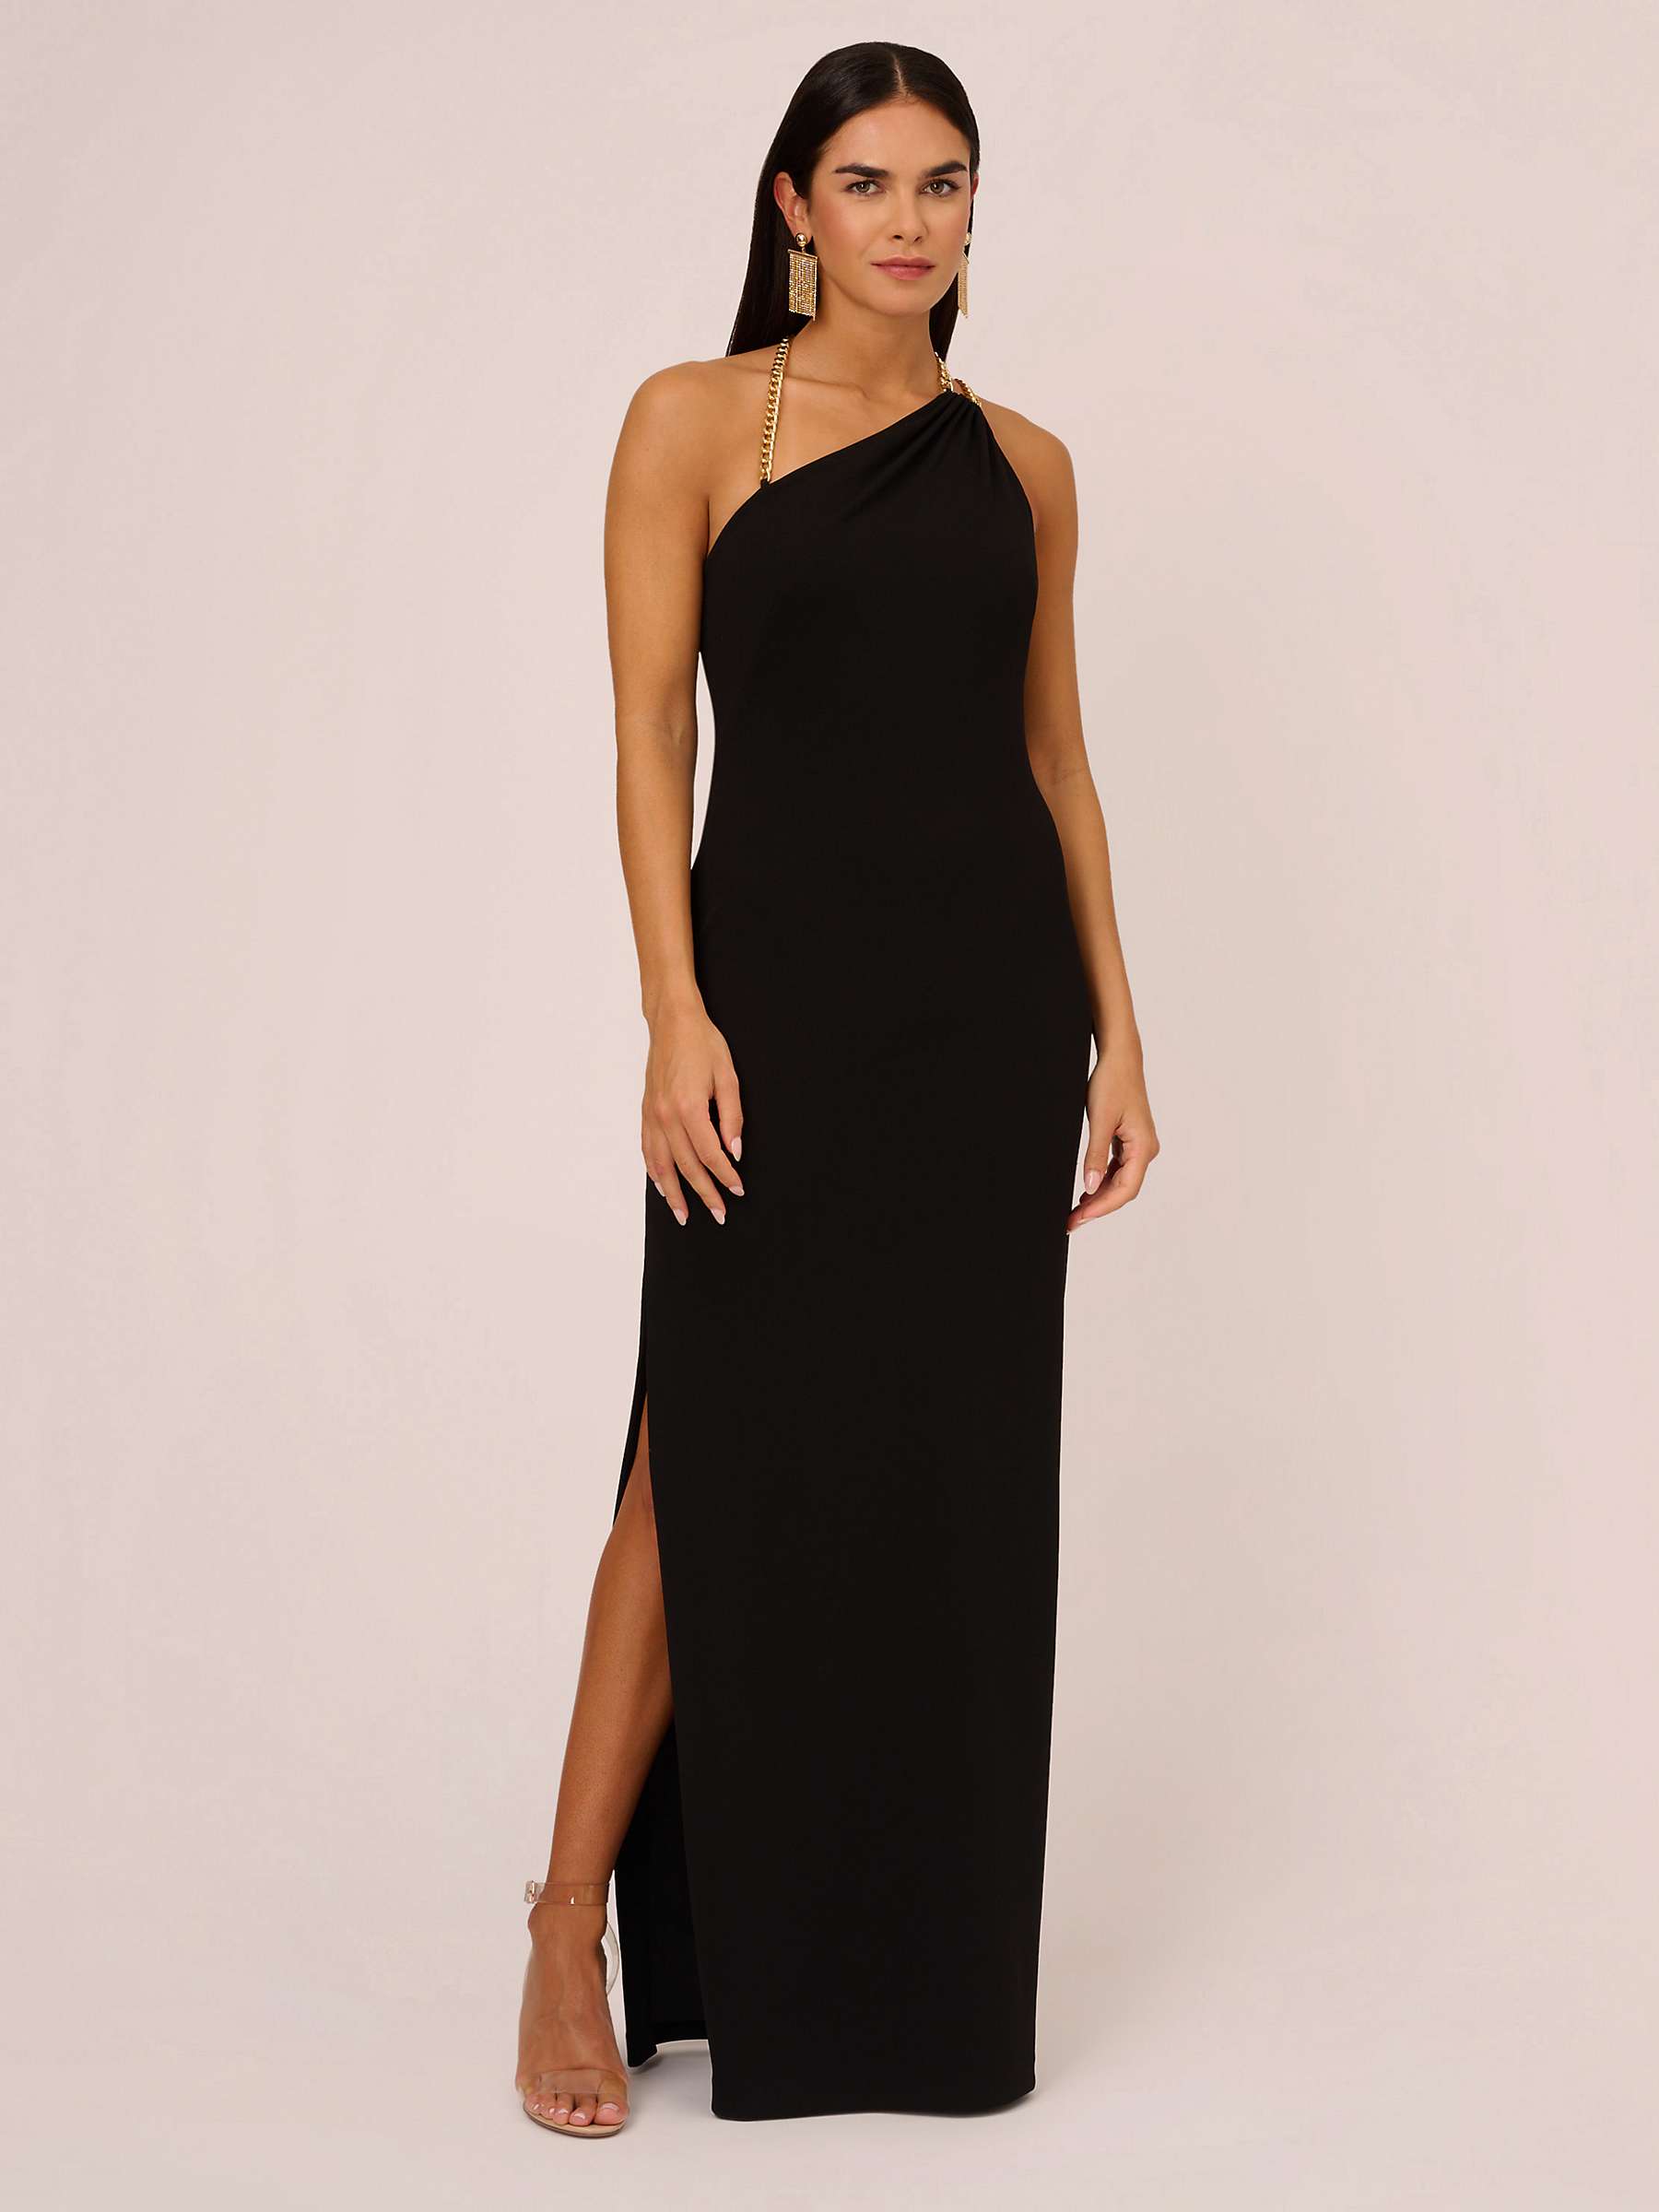 Buy Aidan by Adrianna Papell Chain Strap Column Dress, Black Online at johnlewis.com